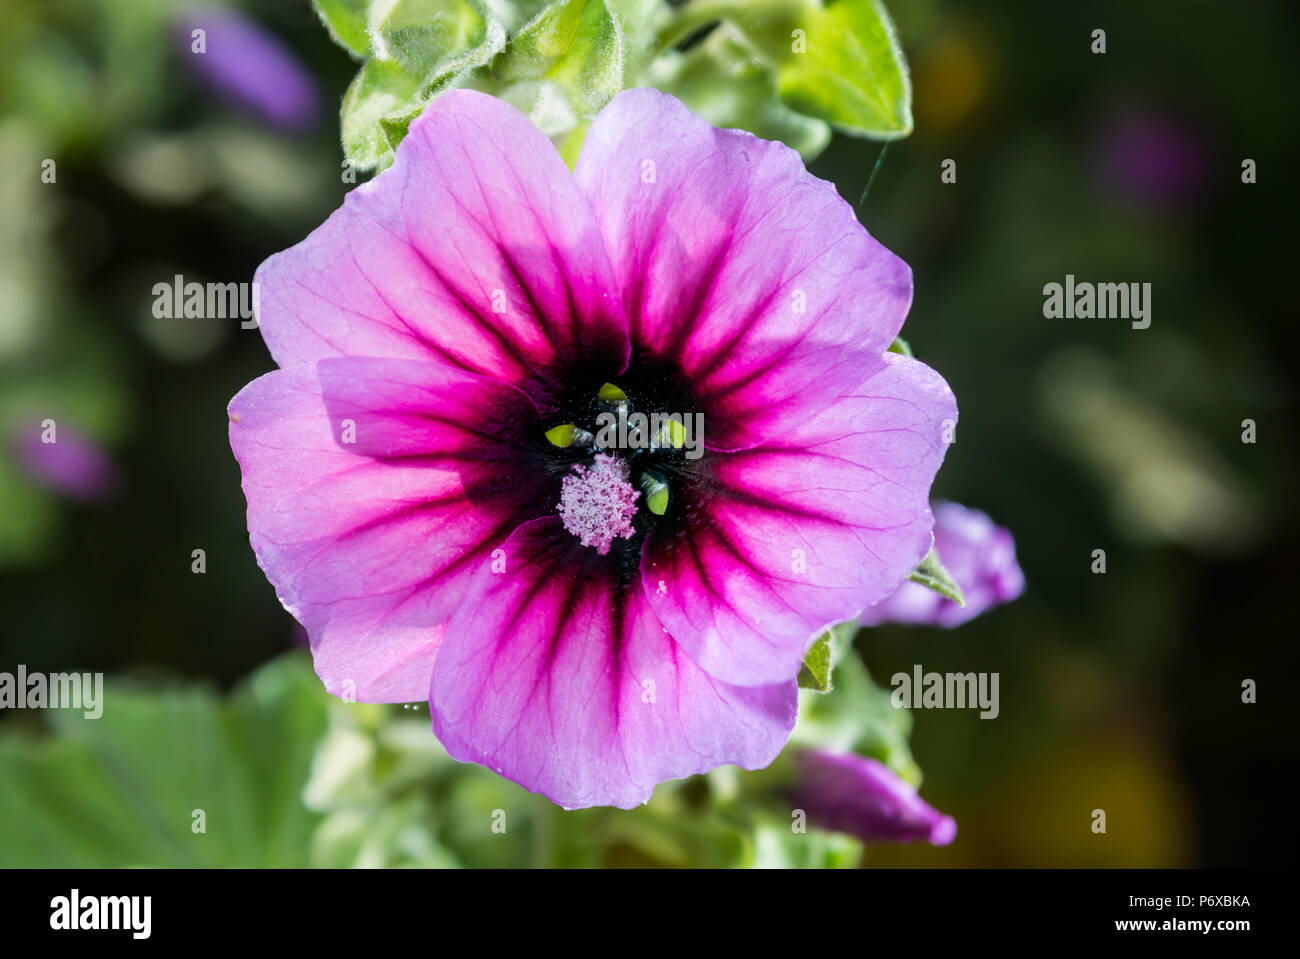 Tree mallow Malva arborea, a close up of the flower of this coastal plant, St Mary's, Isles of Scilly, June Stock Photo